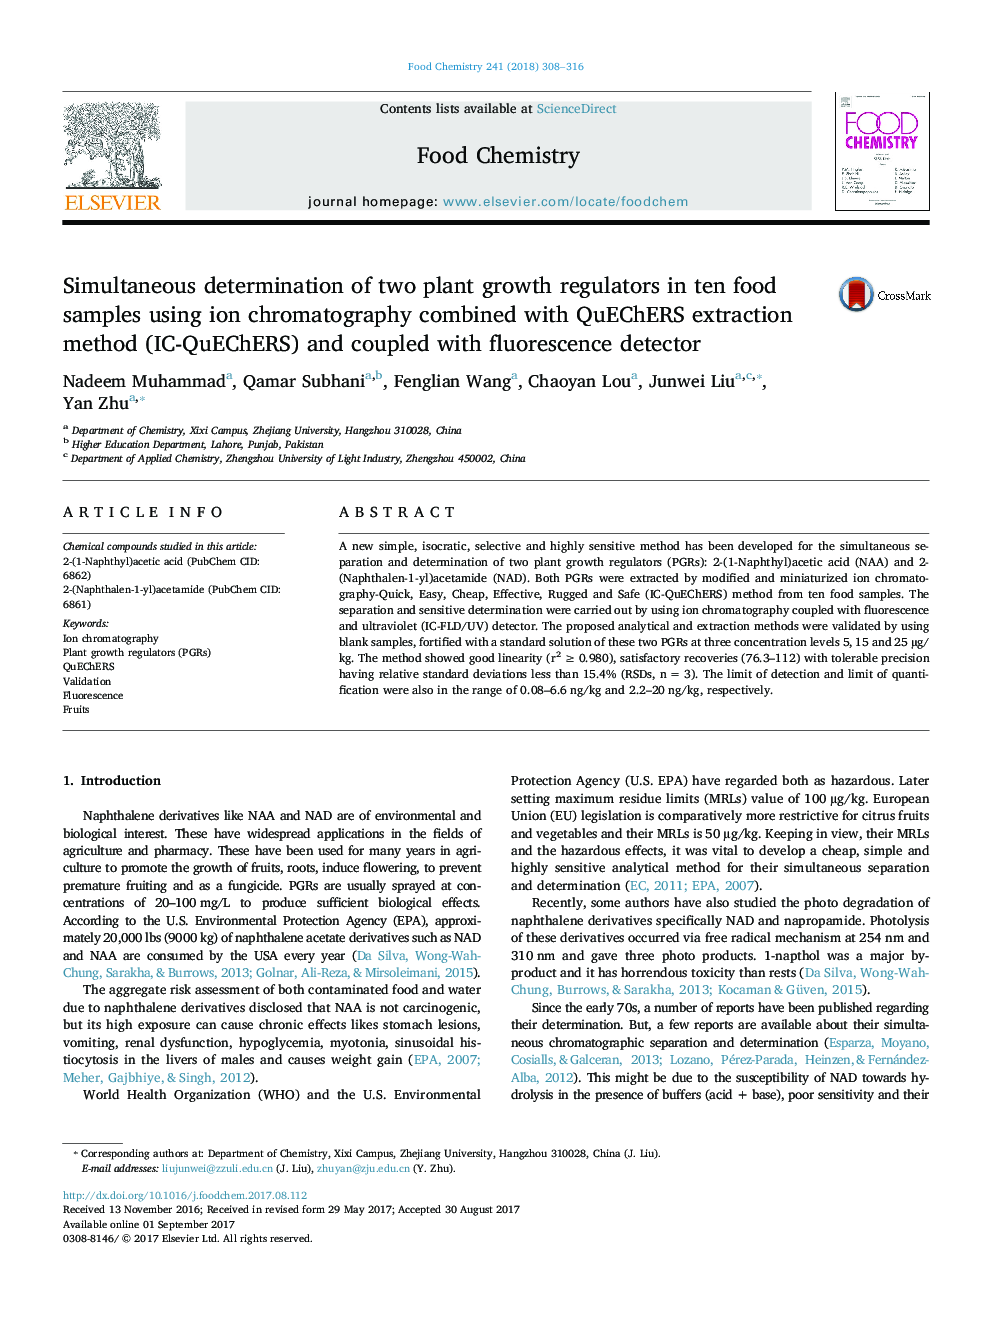 Simultaneous determination of two plant growth regulators in ten food samples using ion chromatography combined with QuEChERS extraction method (IC-QuEChERS) and coupled with fluorescence detector